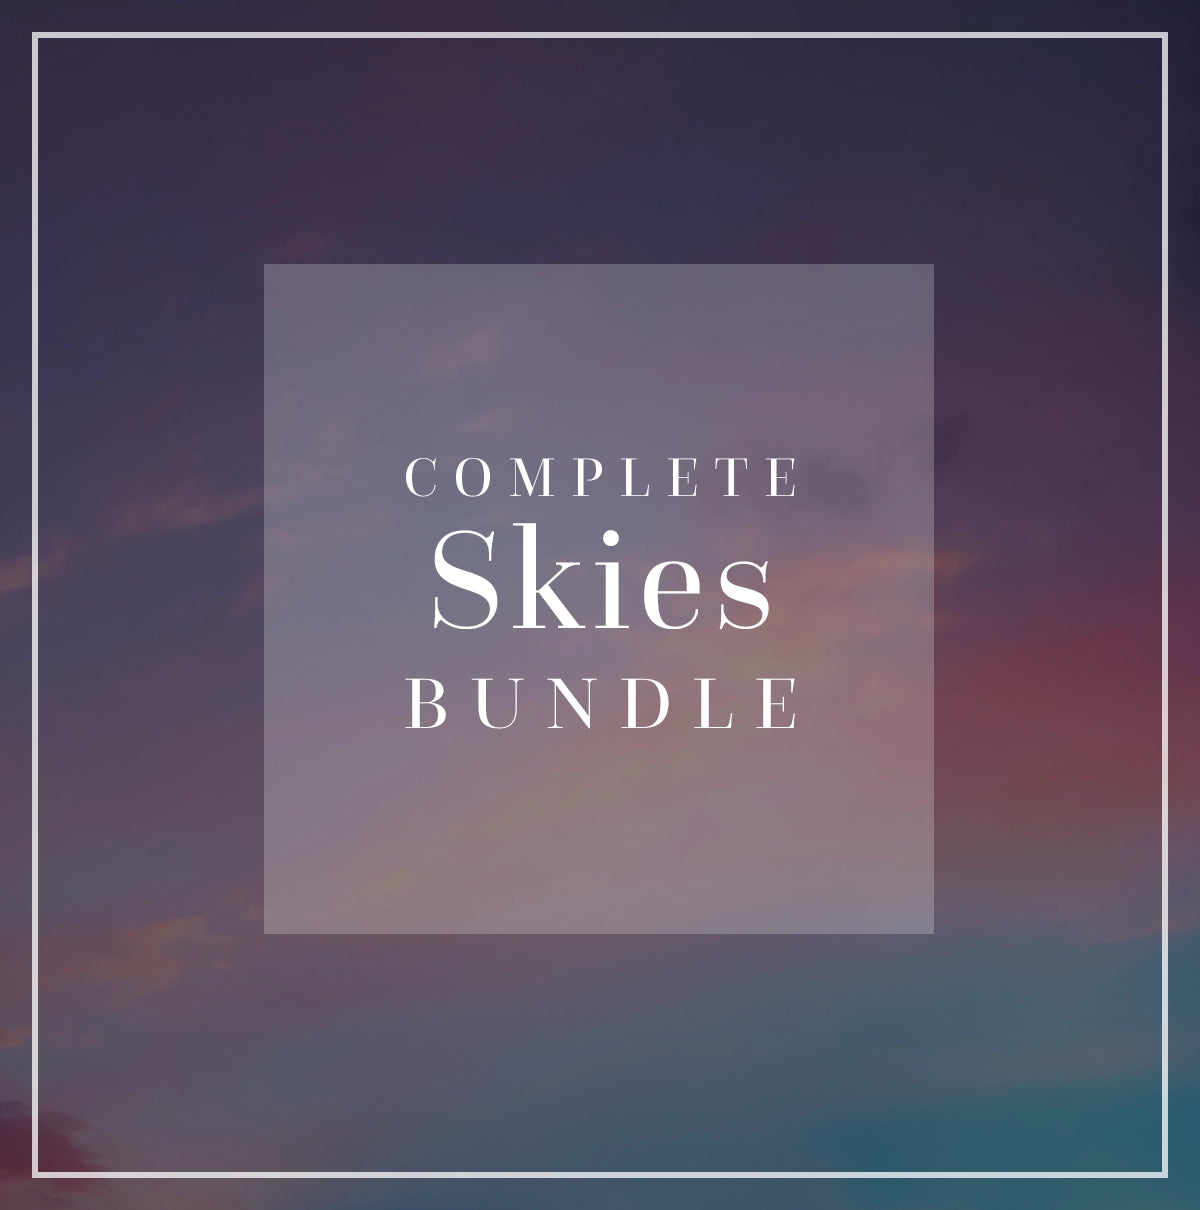 Skies Photoshop Overlays Bundles for Photography Editing